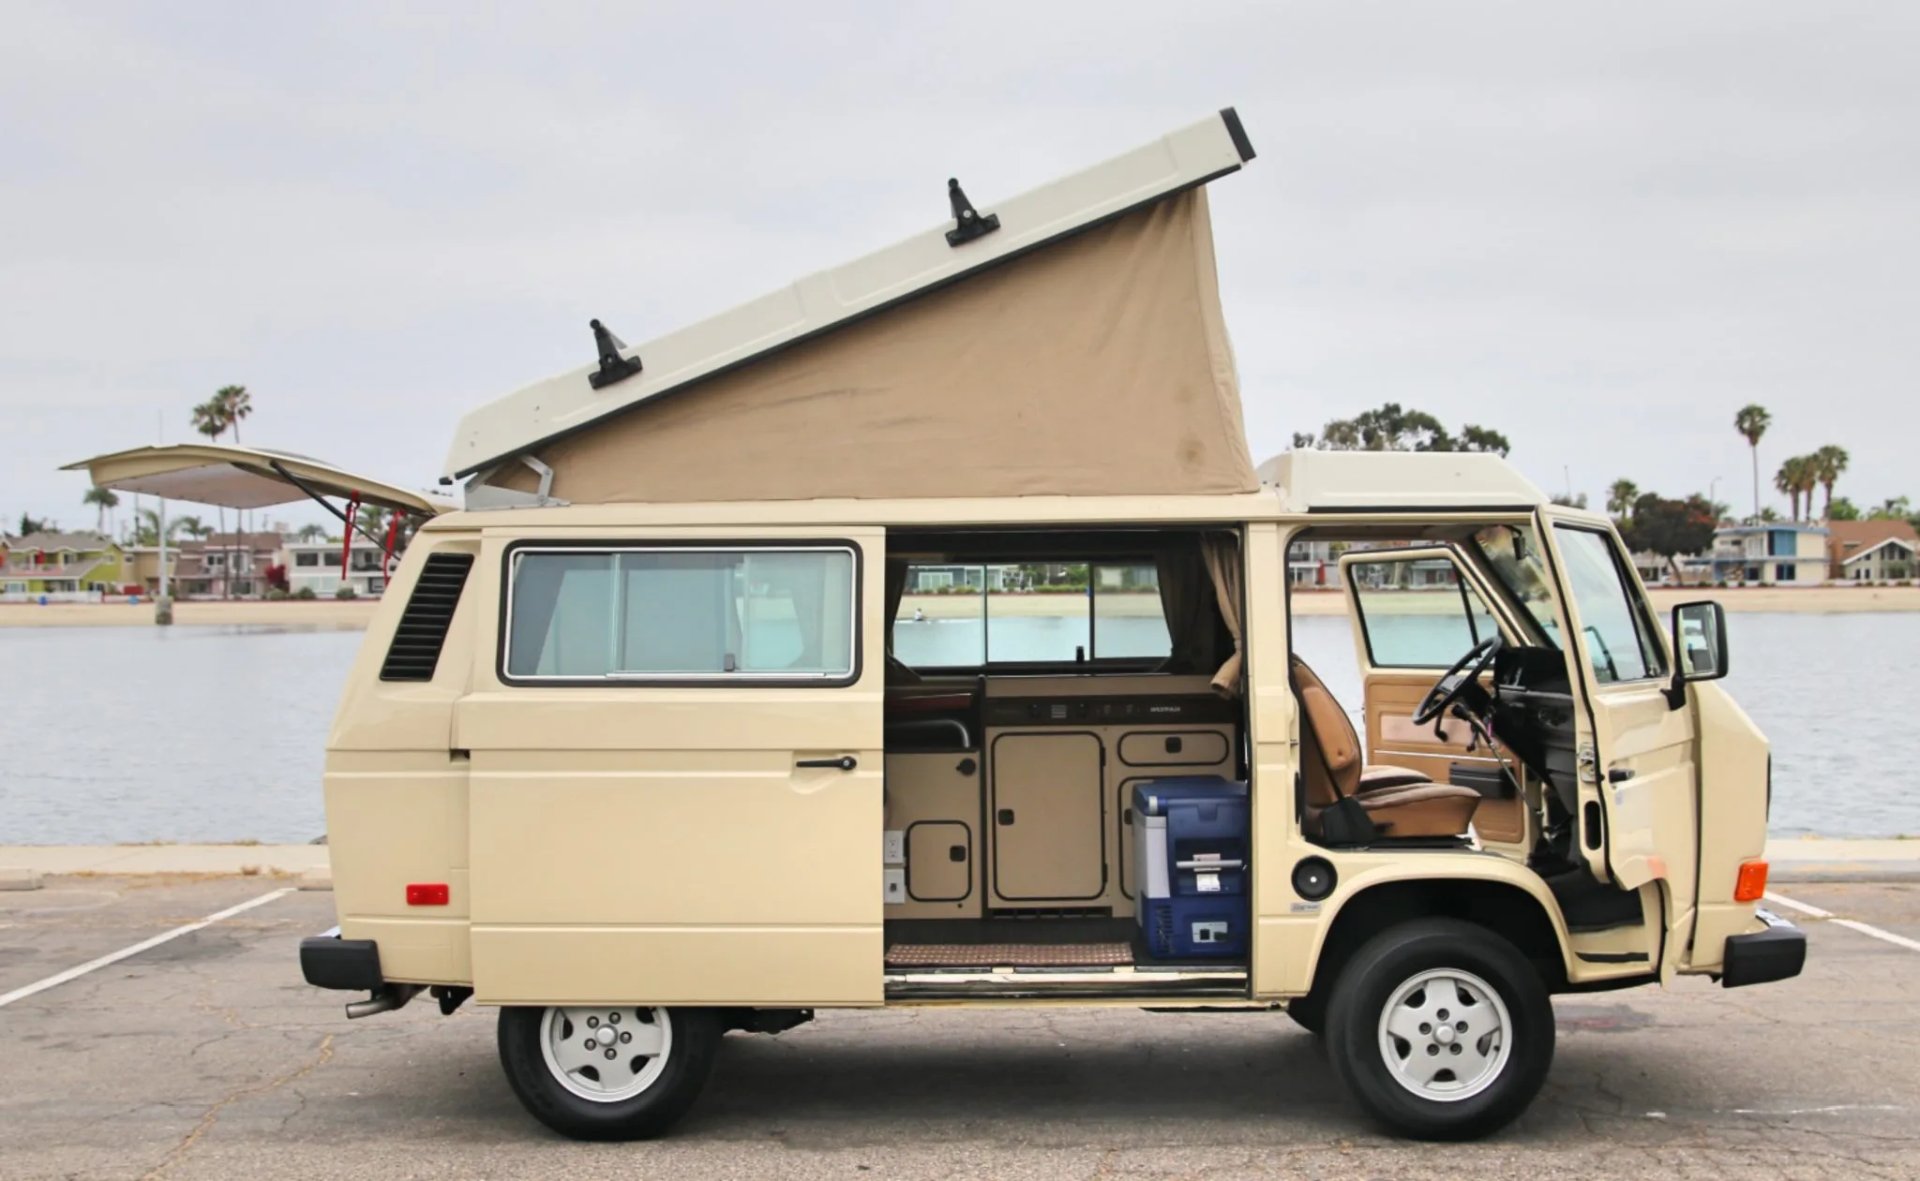 At $9,500, Could You Get Carried Away With This 1985 VW T3